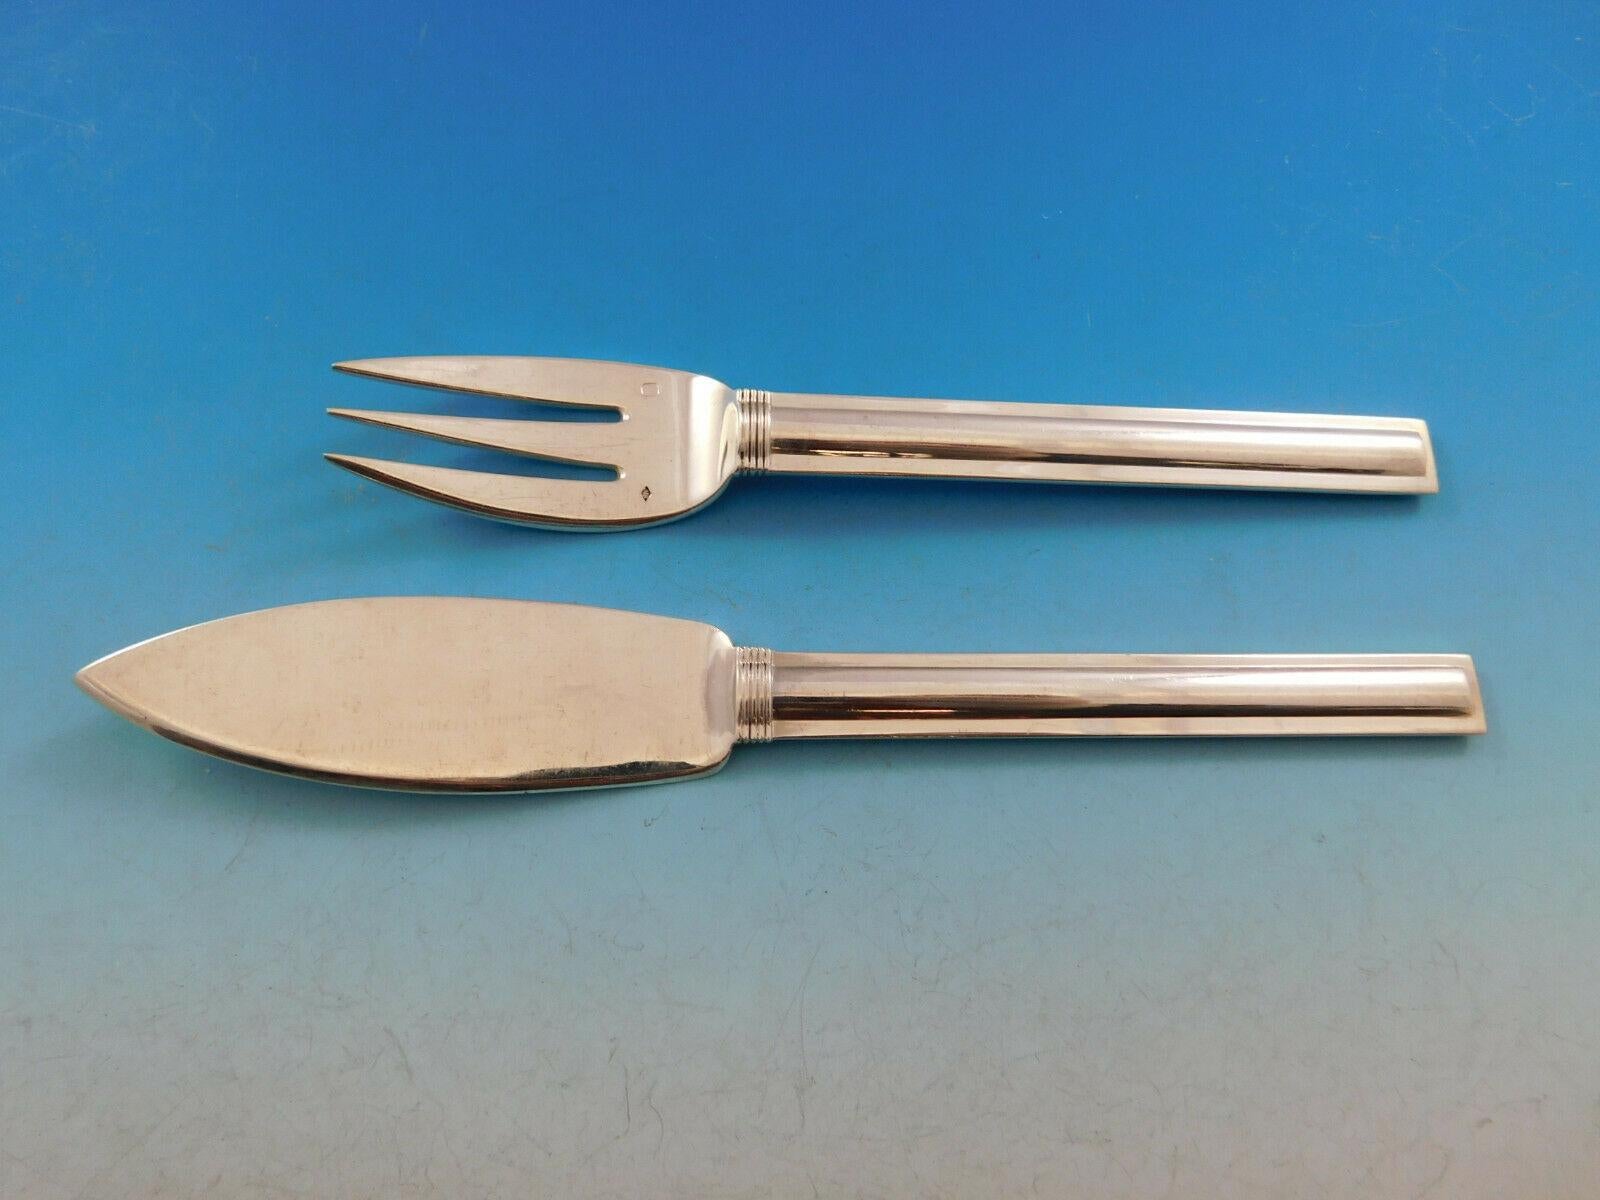 Cannes by Puiforcat France sterling silver flatware. This 2-piece set includes:

 1 individual fish knife, 8